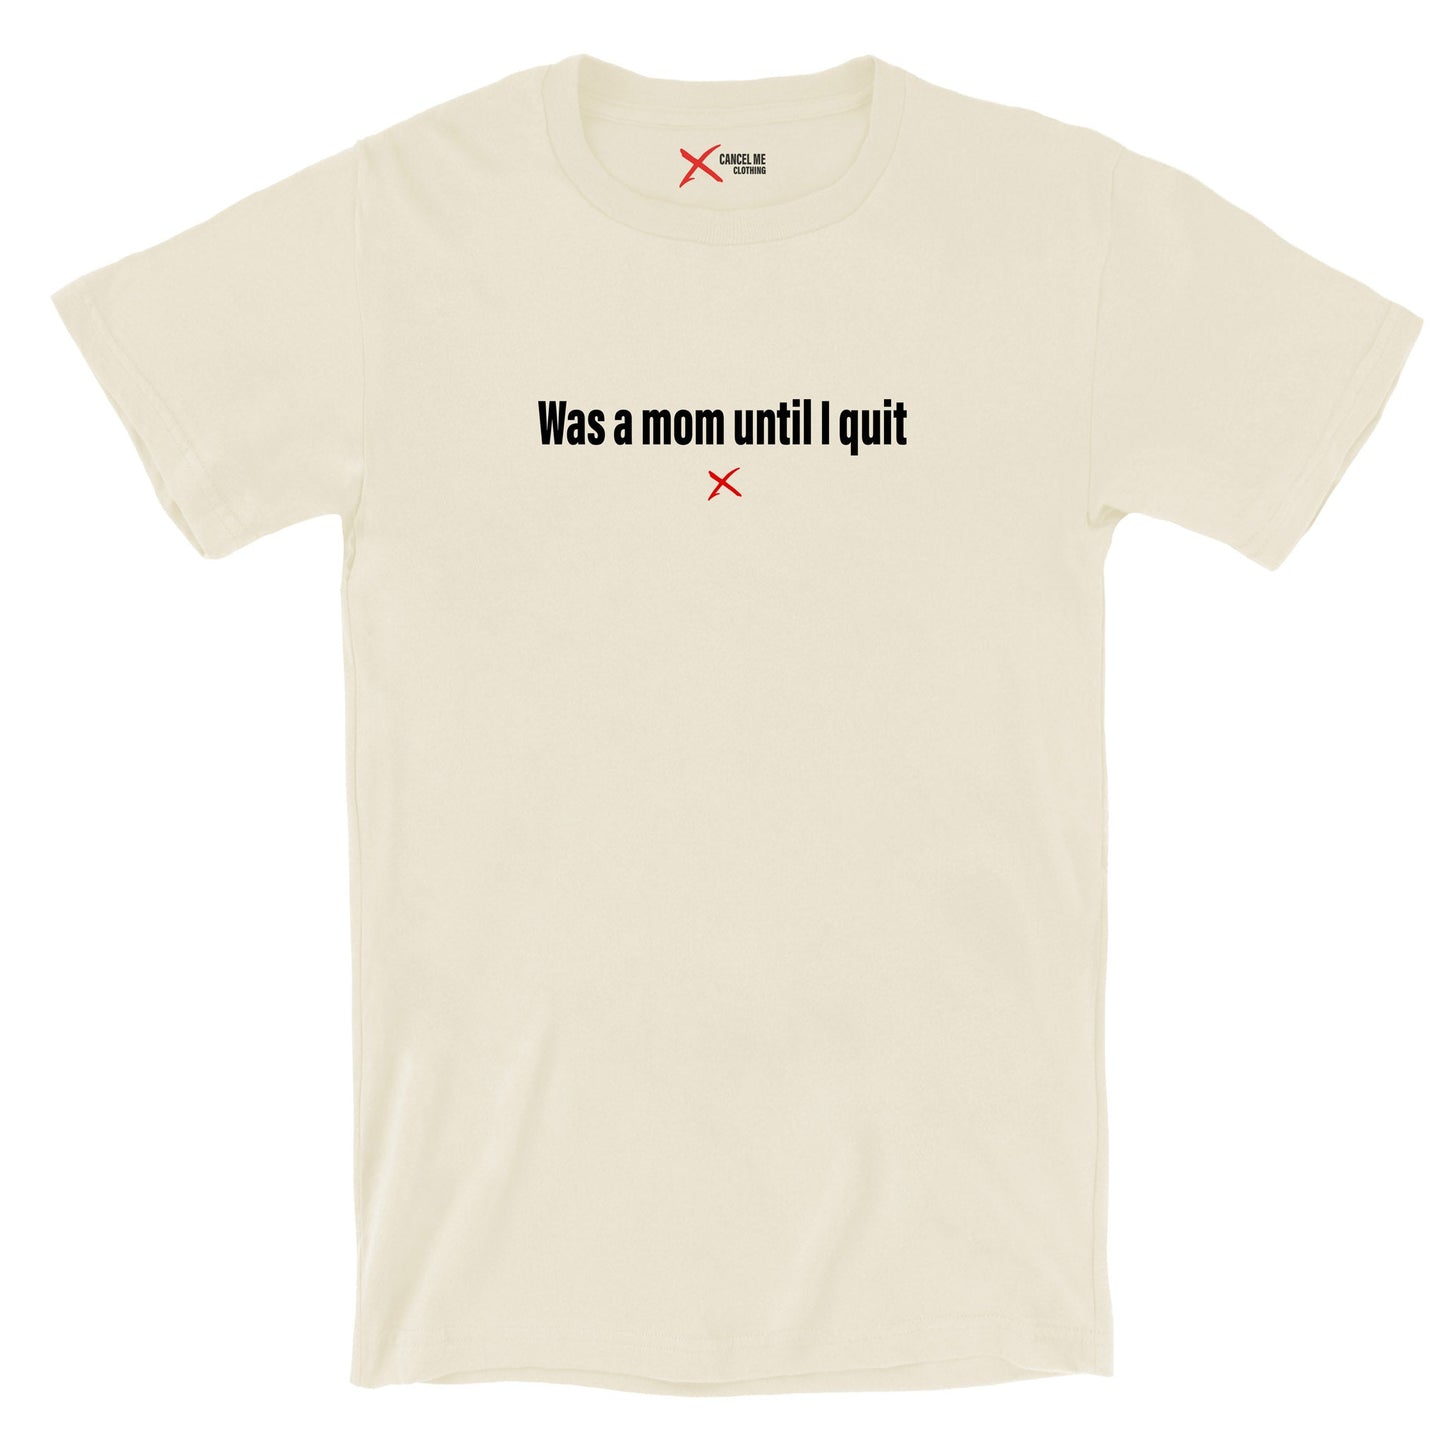 Was a mom until I quit - Shirt